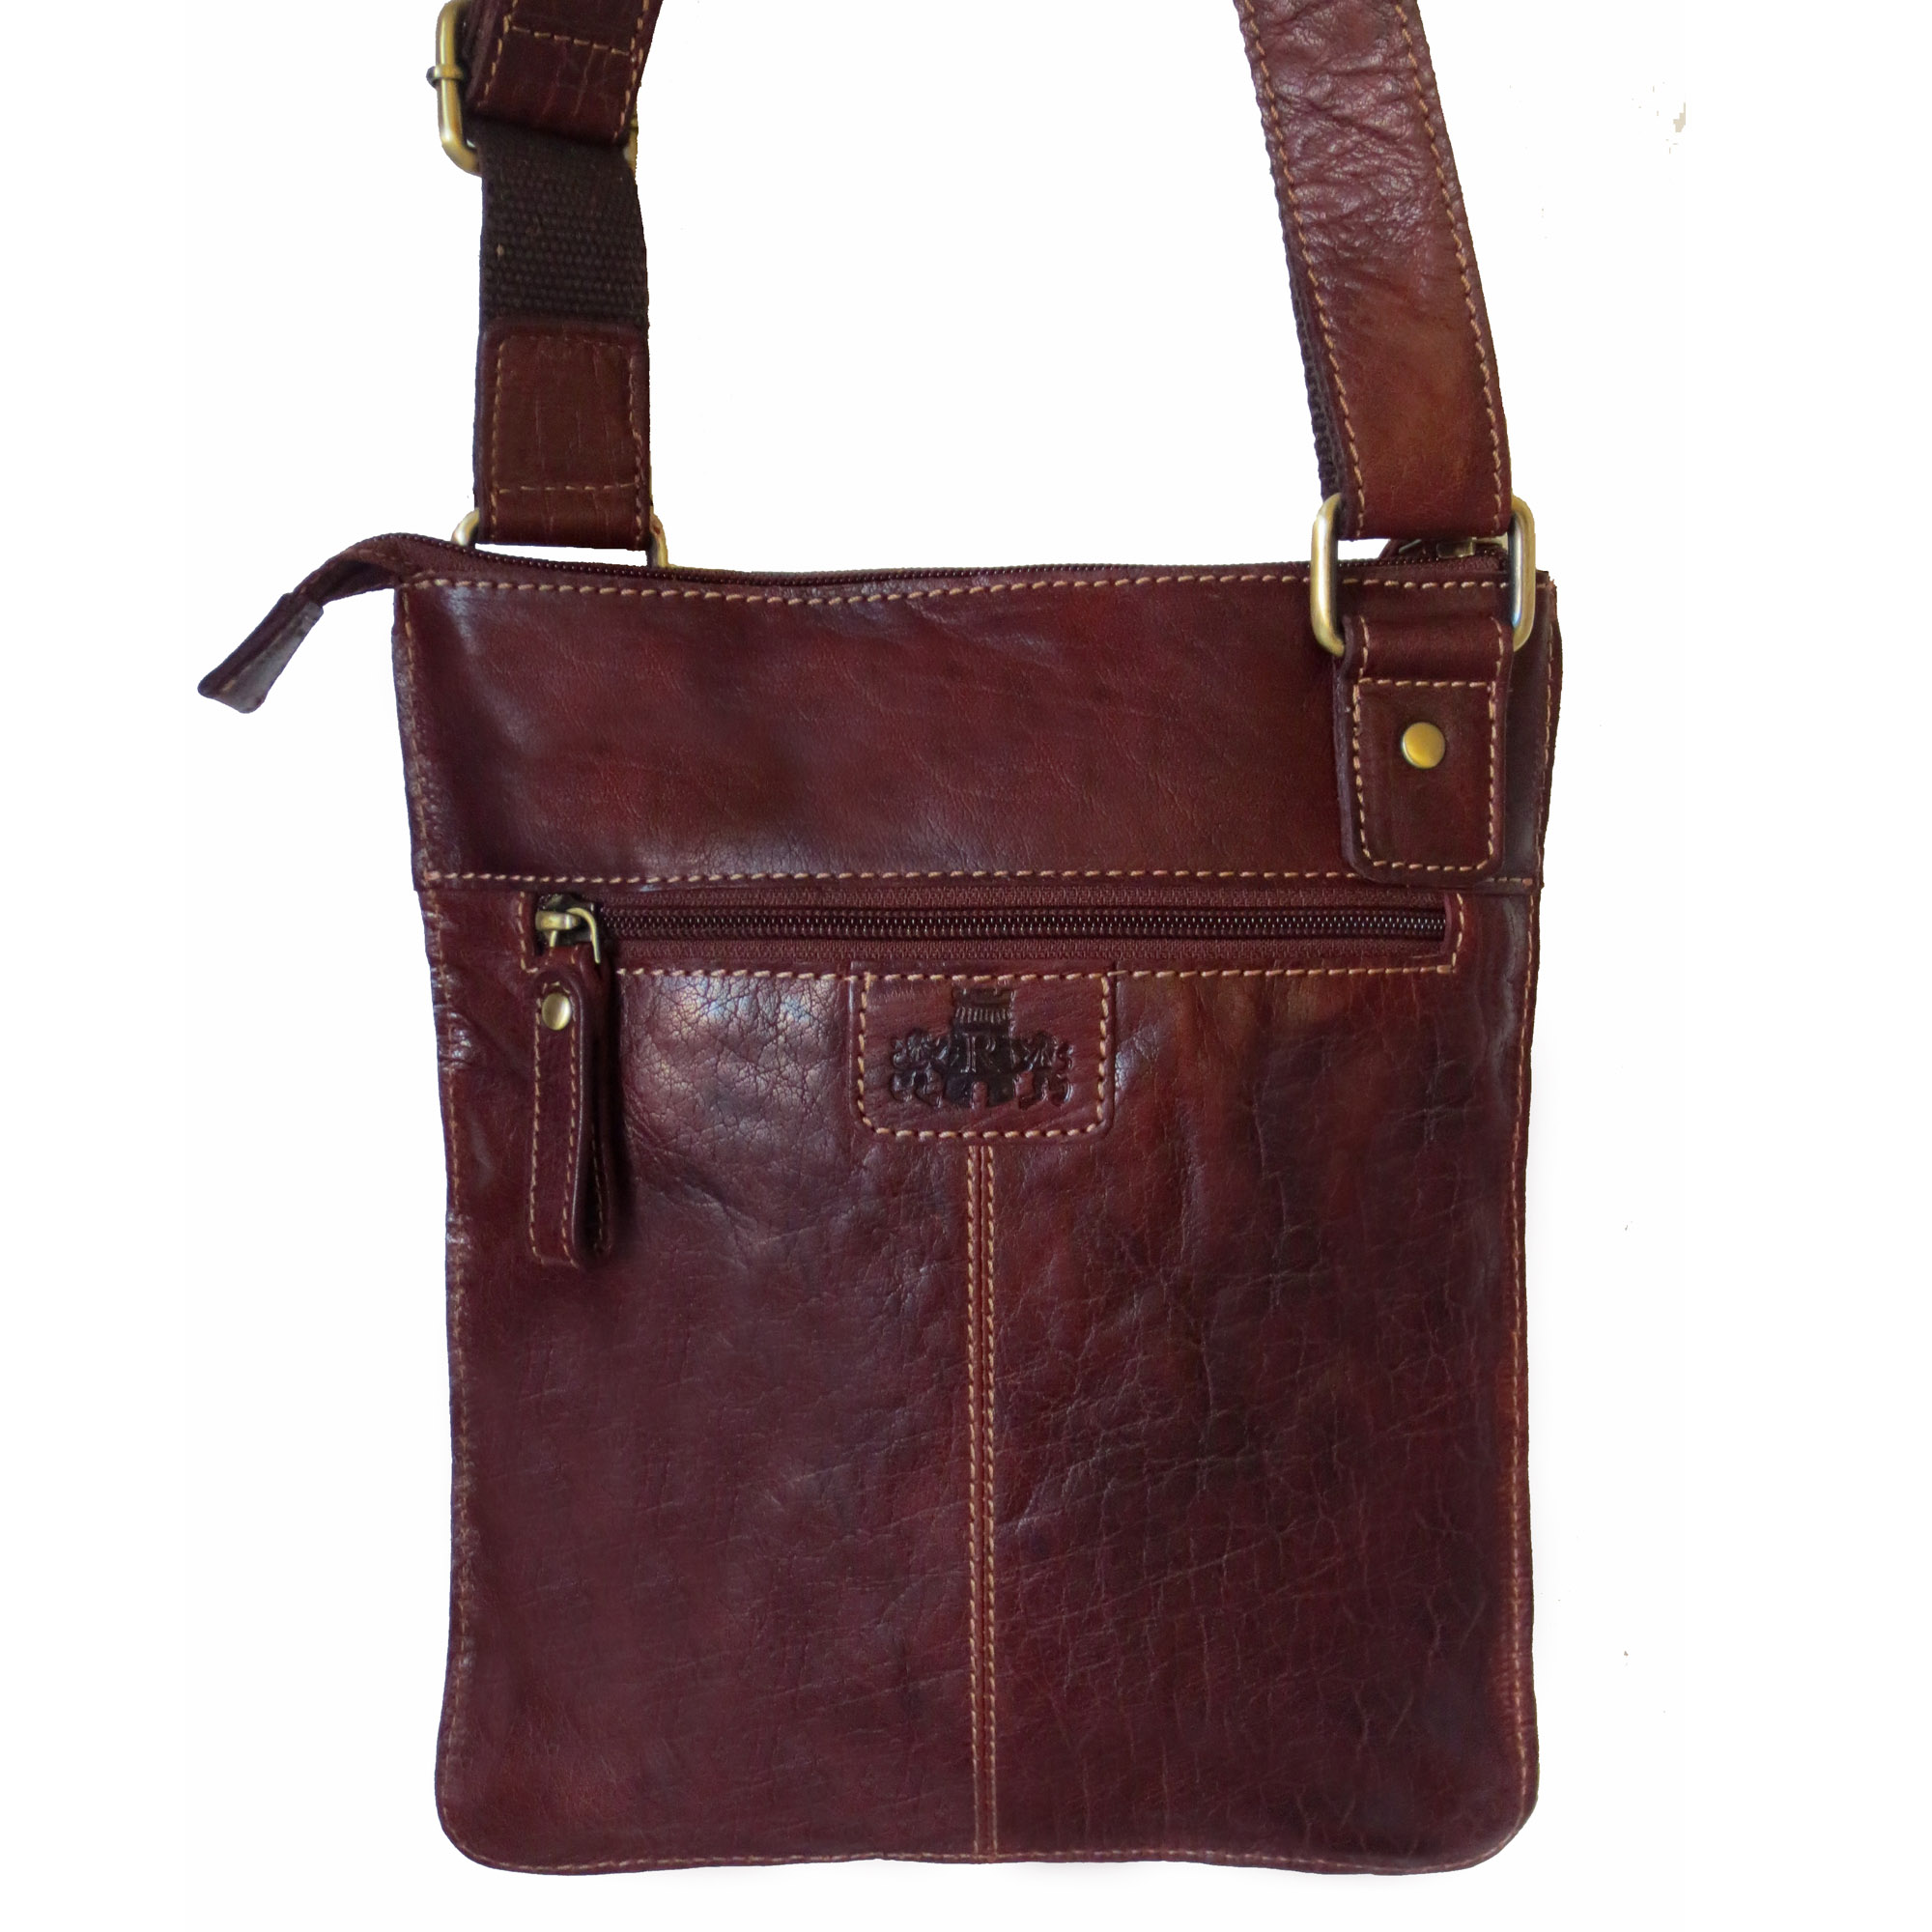 The Handbag Company have a range of women’s leather bags by Rowallan of ...